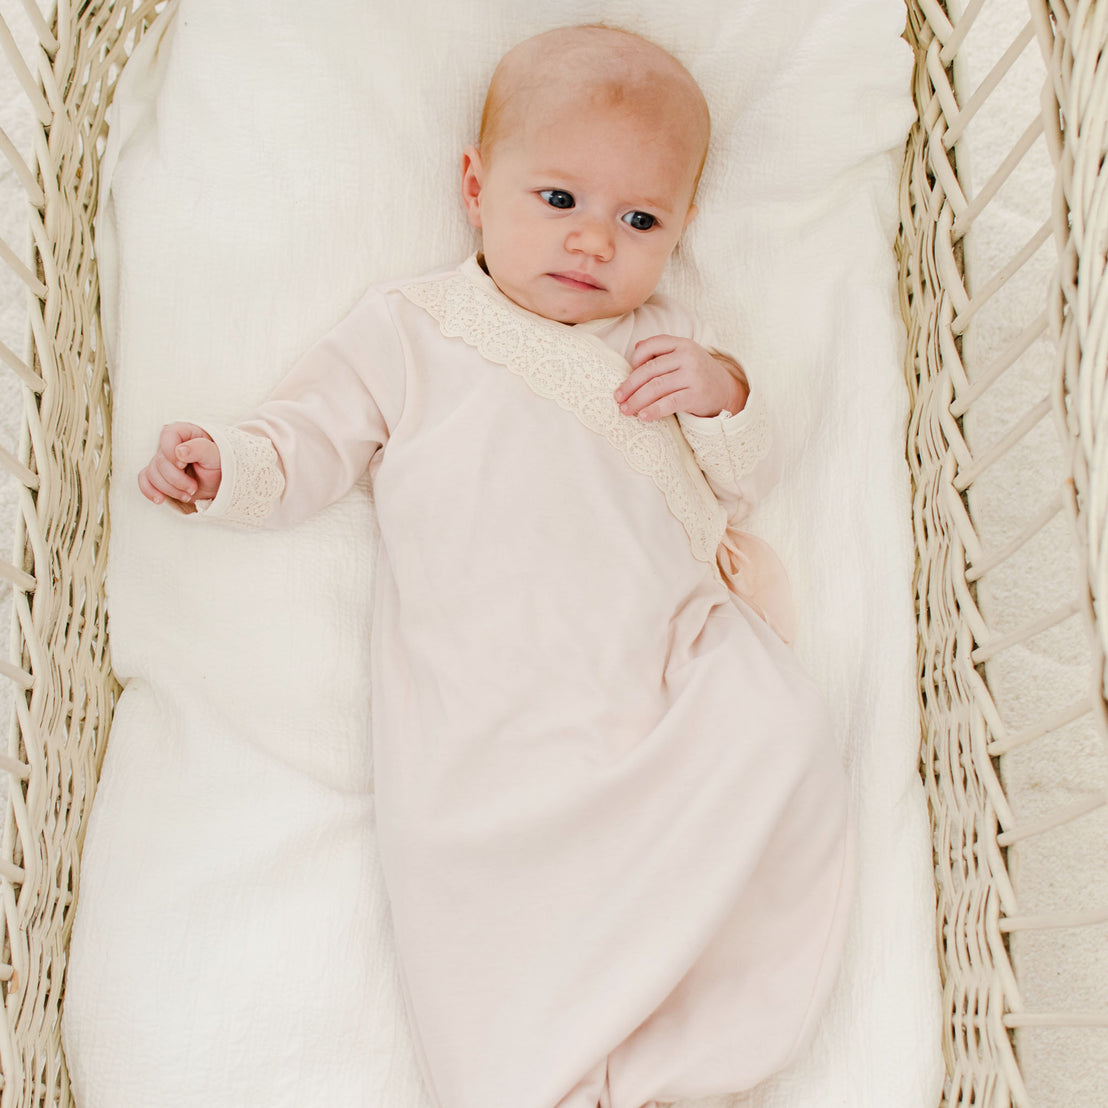 A newborn wearing the Evelyn Knot Gown with lace detailing lies in a white wicker basket, looking up with a calm expression.